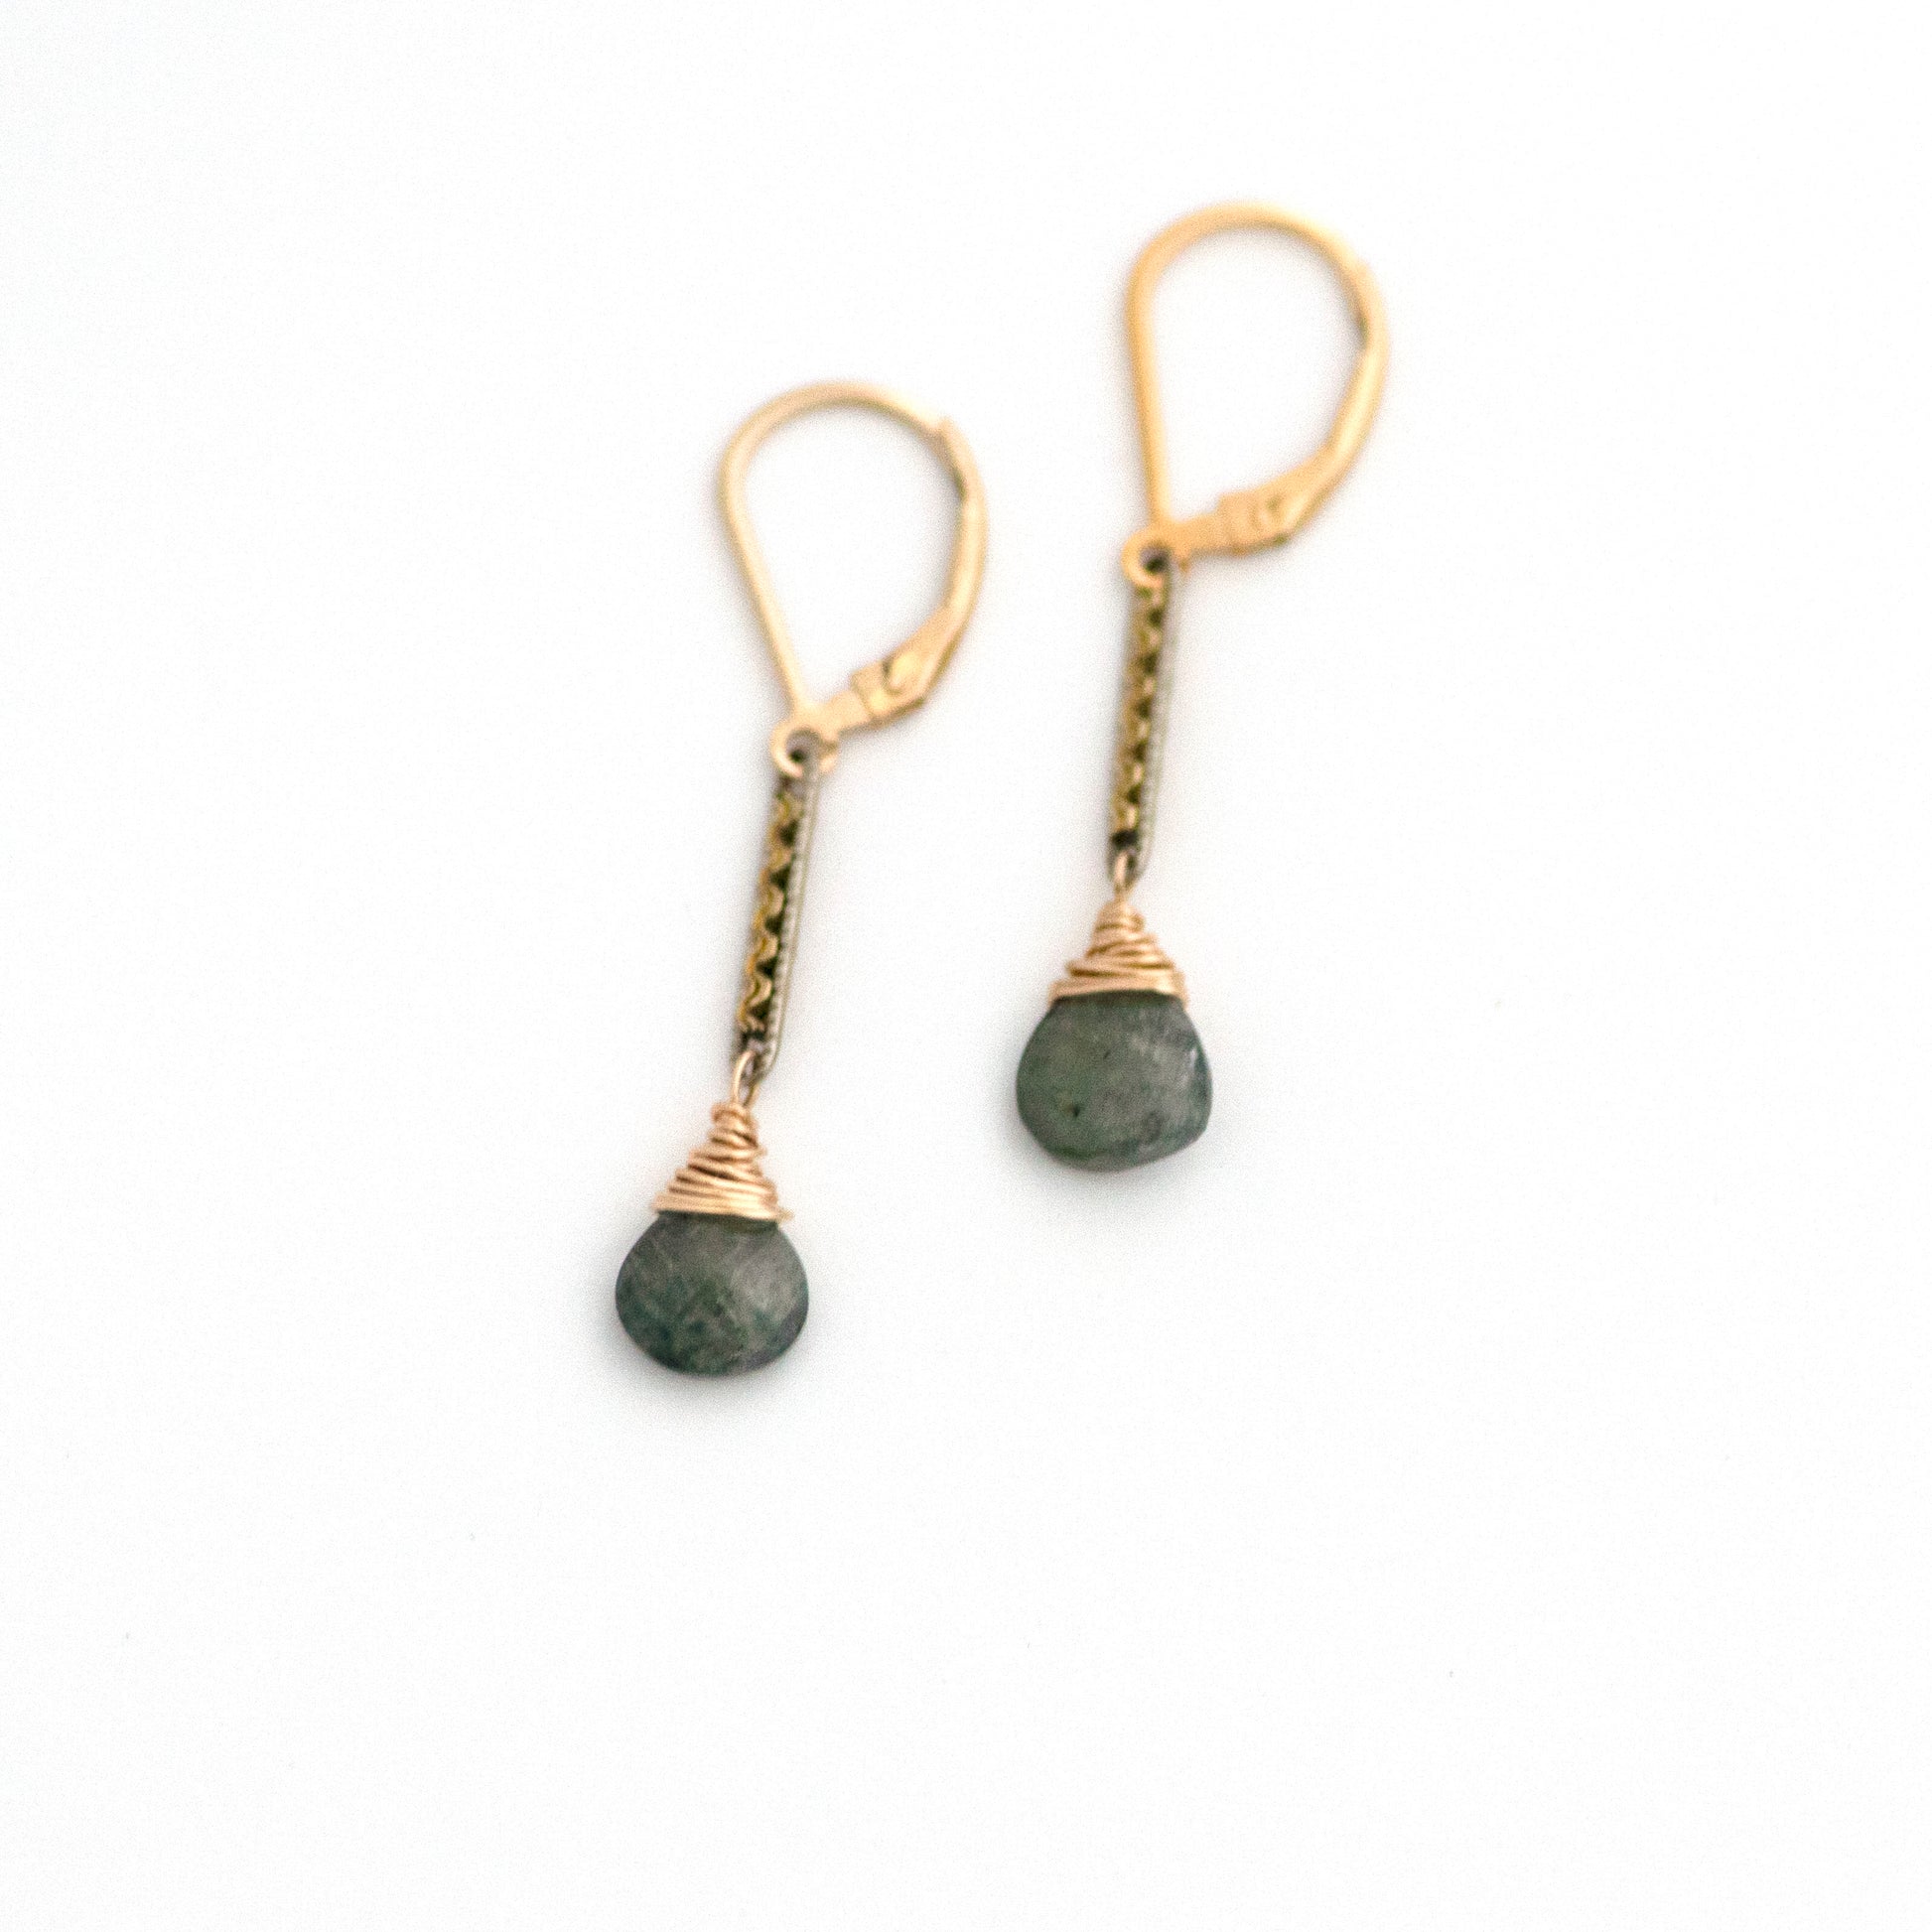 These one-of-a-kind conversion earrings are made up of:  Gold filled and silver tone Edwardian watch chain links from the early 1900s with hand tooled details. Moss aquamarine.